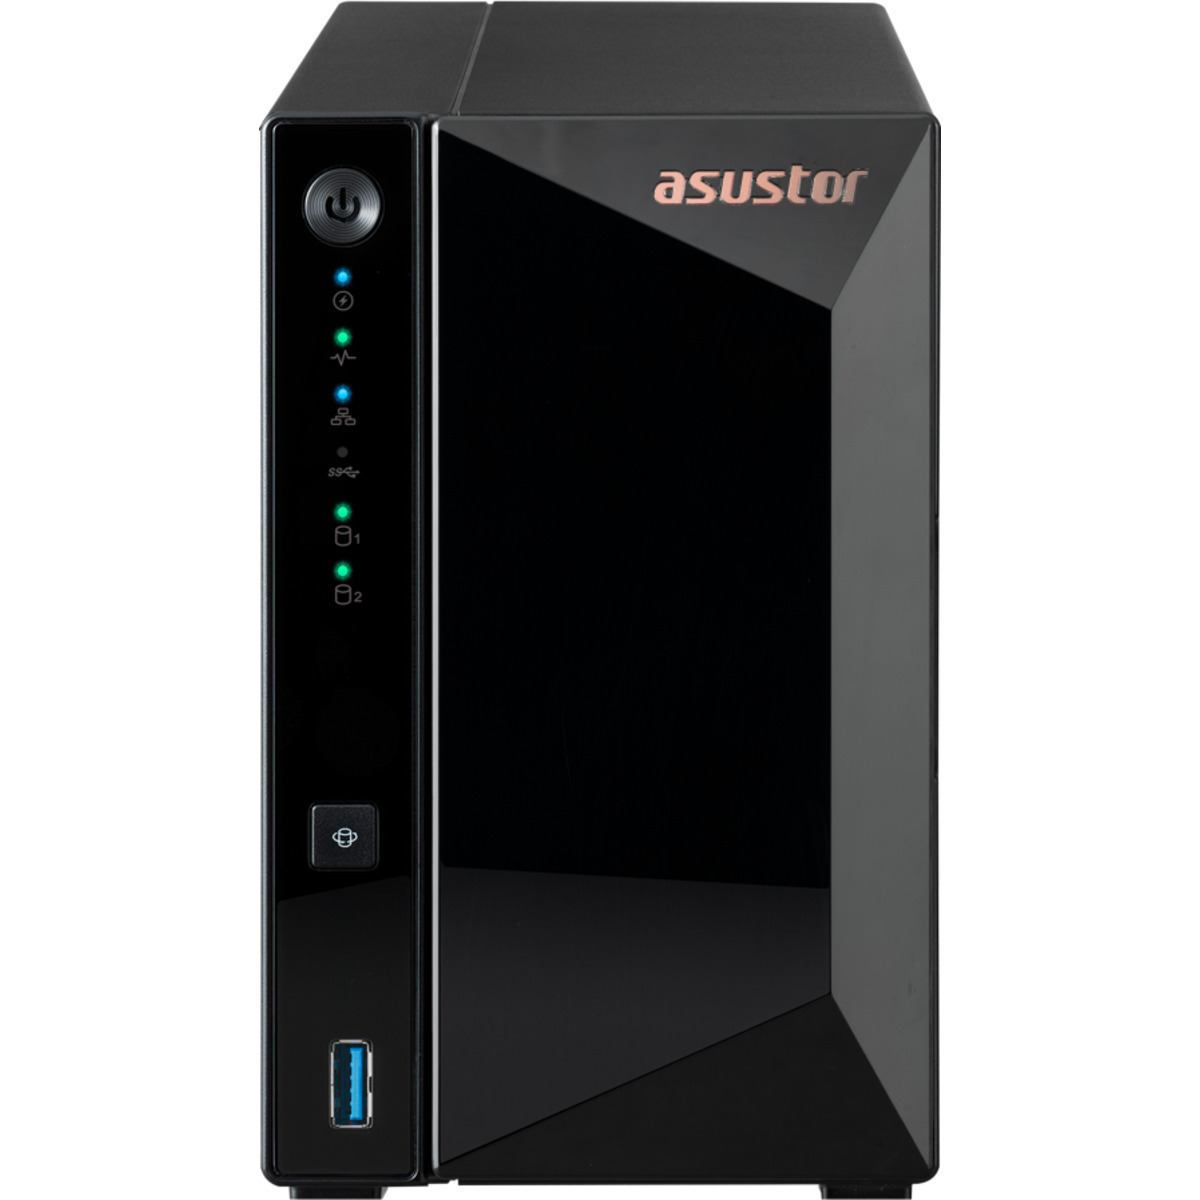 ASUSTOR DRIVESTOR 2 Pro Gen2 AS3302T v2 16tb 2-Bay Desktop Personal / Basic Home / Small Office NAS - Network Attached Storage Device 2x8tb Seagate IronWolf Pro ST8000NT001 3.5 7200rpm SATA 6Gb/s HDD NAS Class Drives Installed - Burn-In Tested - ON SALE DRIVESTOR 2 Pro Gen2 AS3302T v2